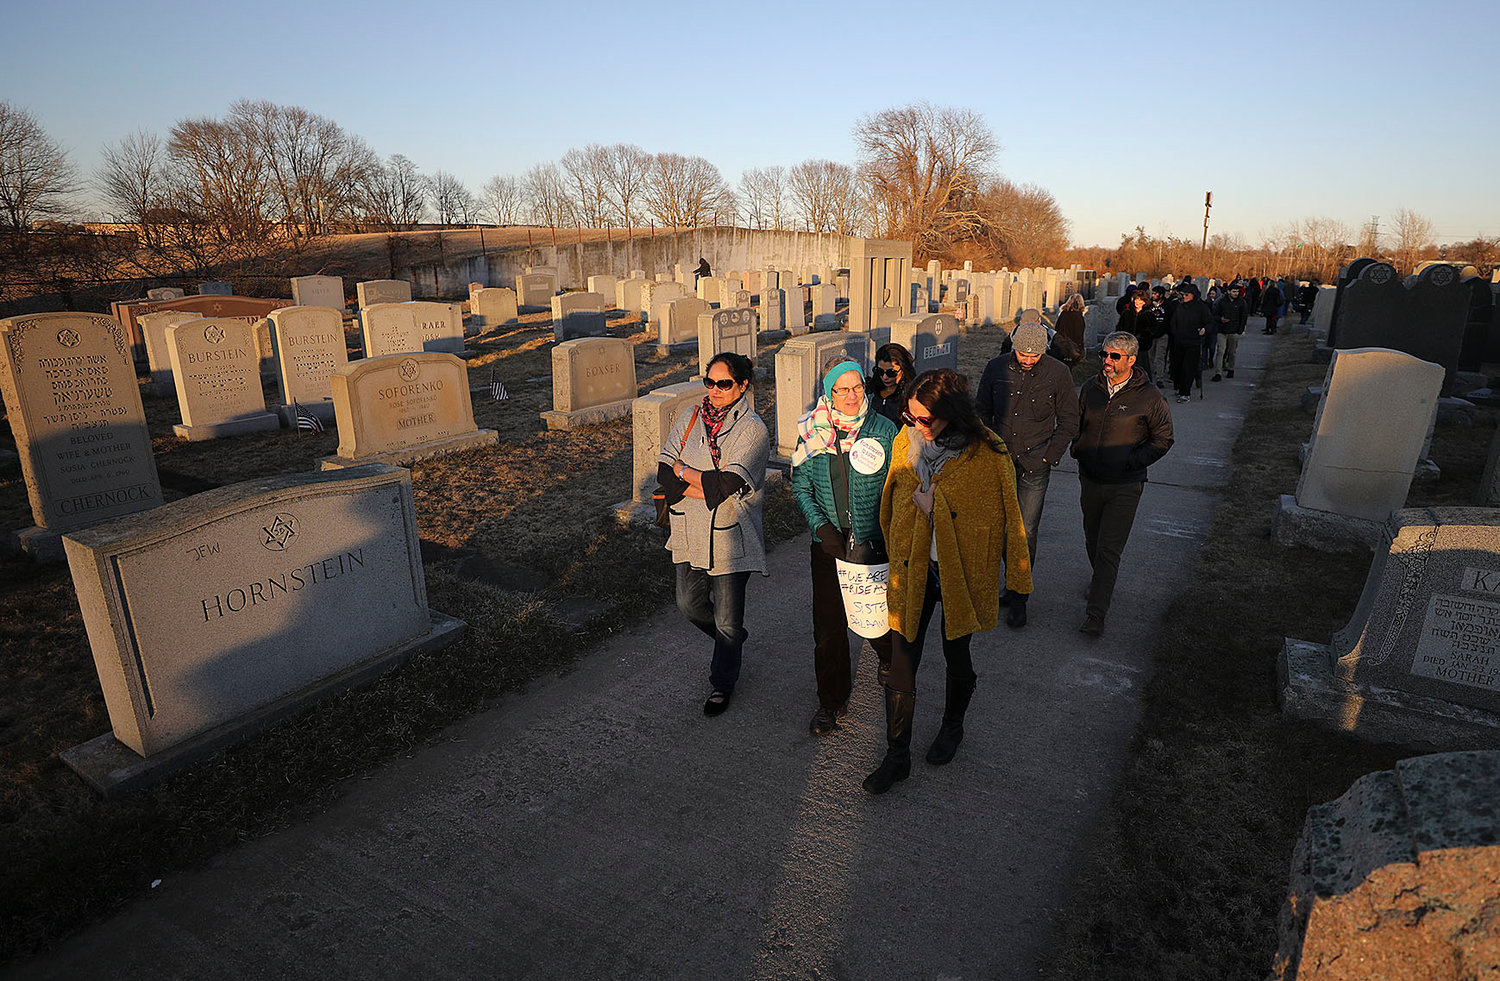 People walk through the cemetery after the ceremony.